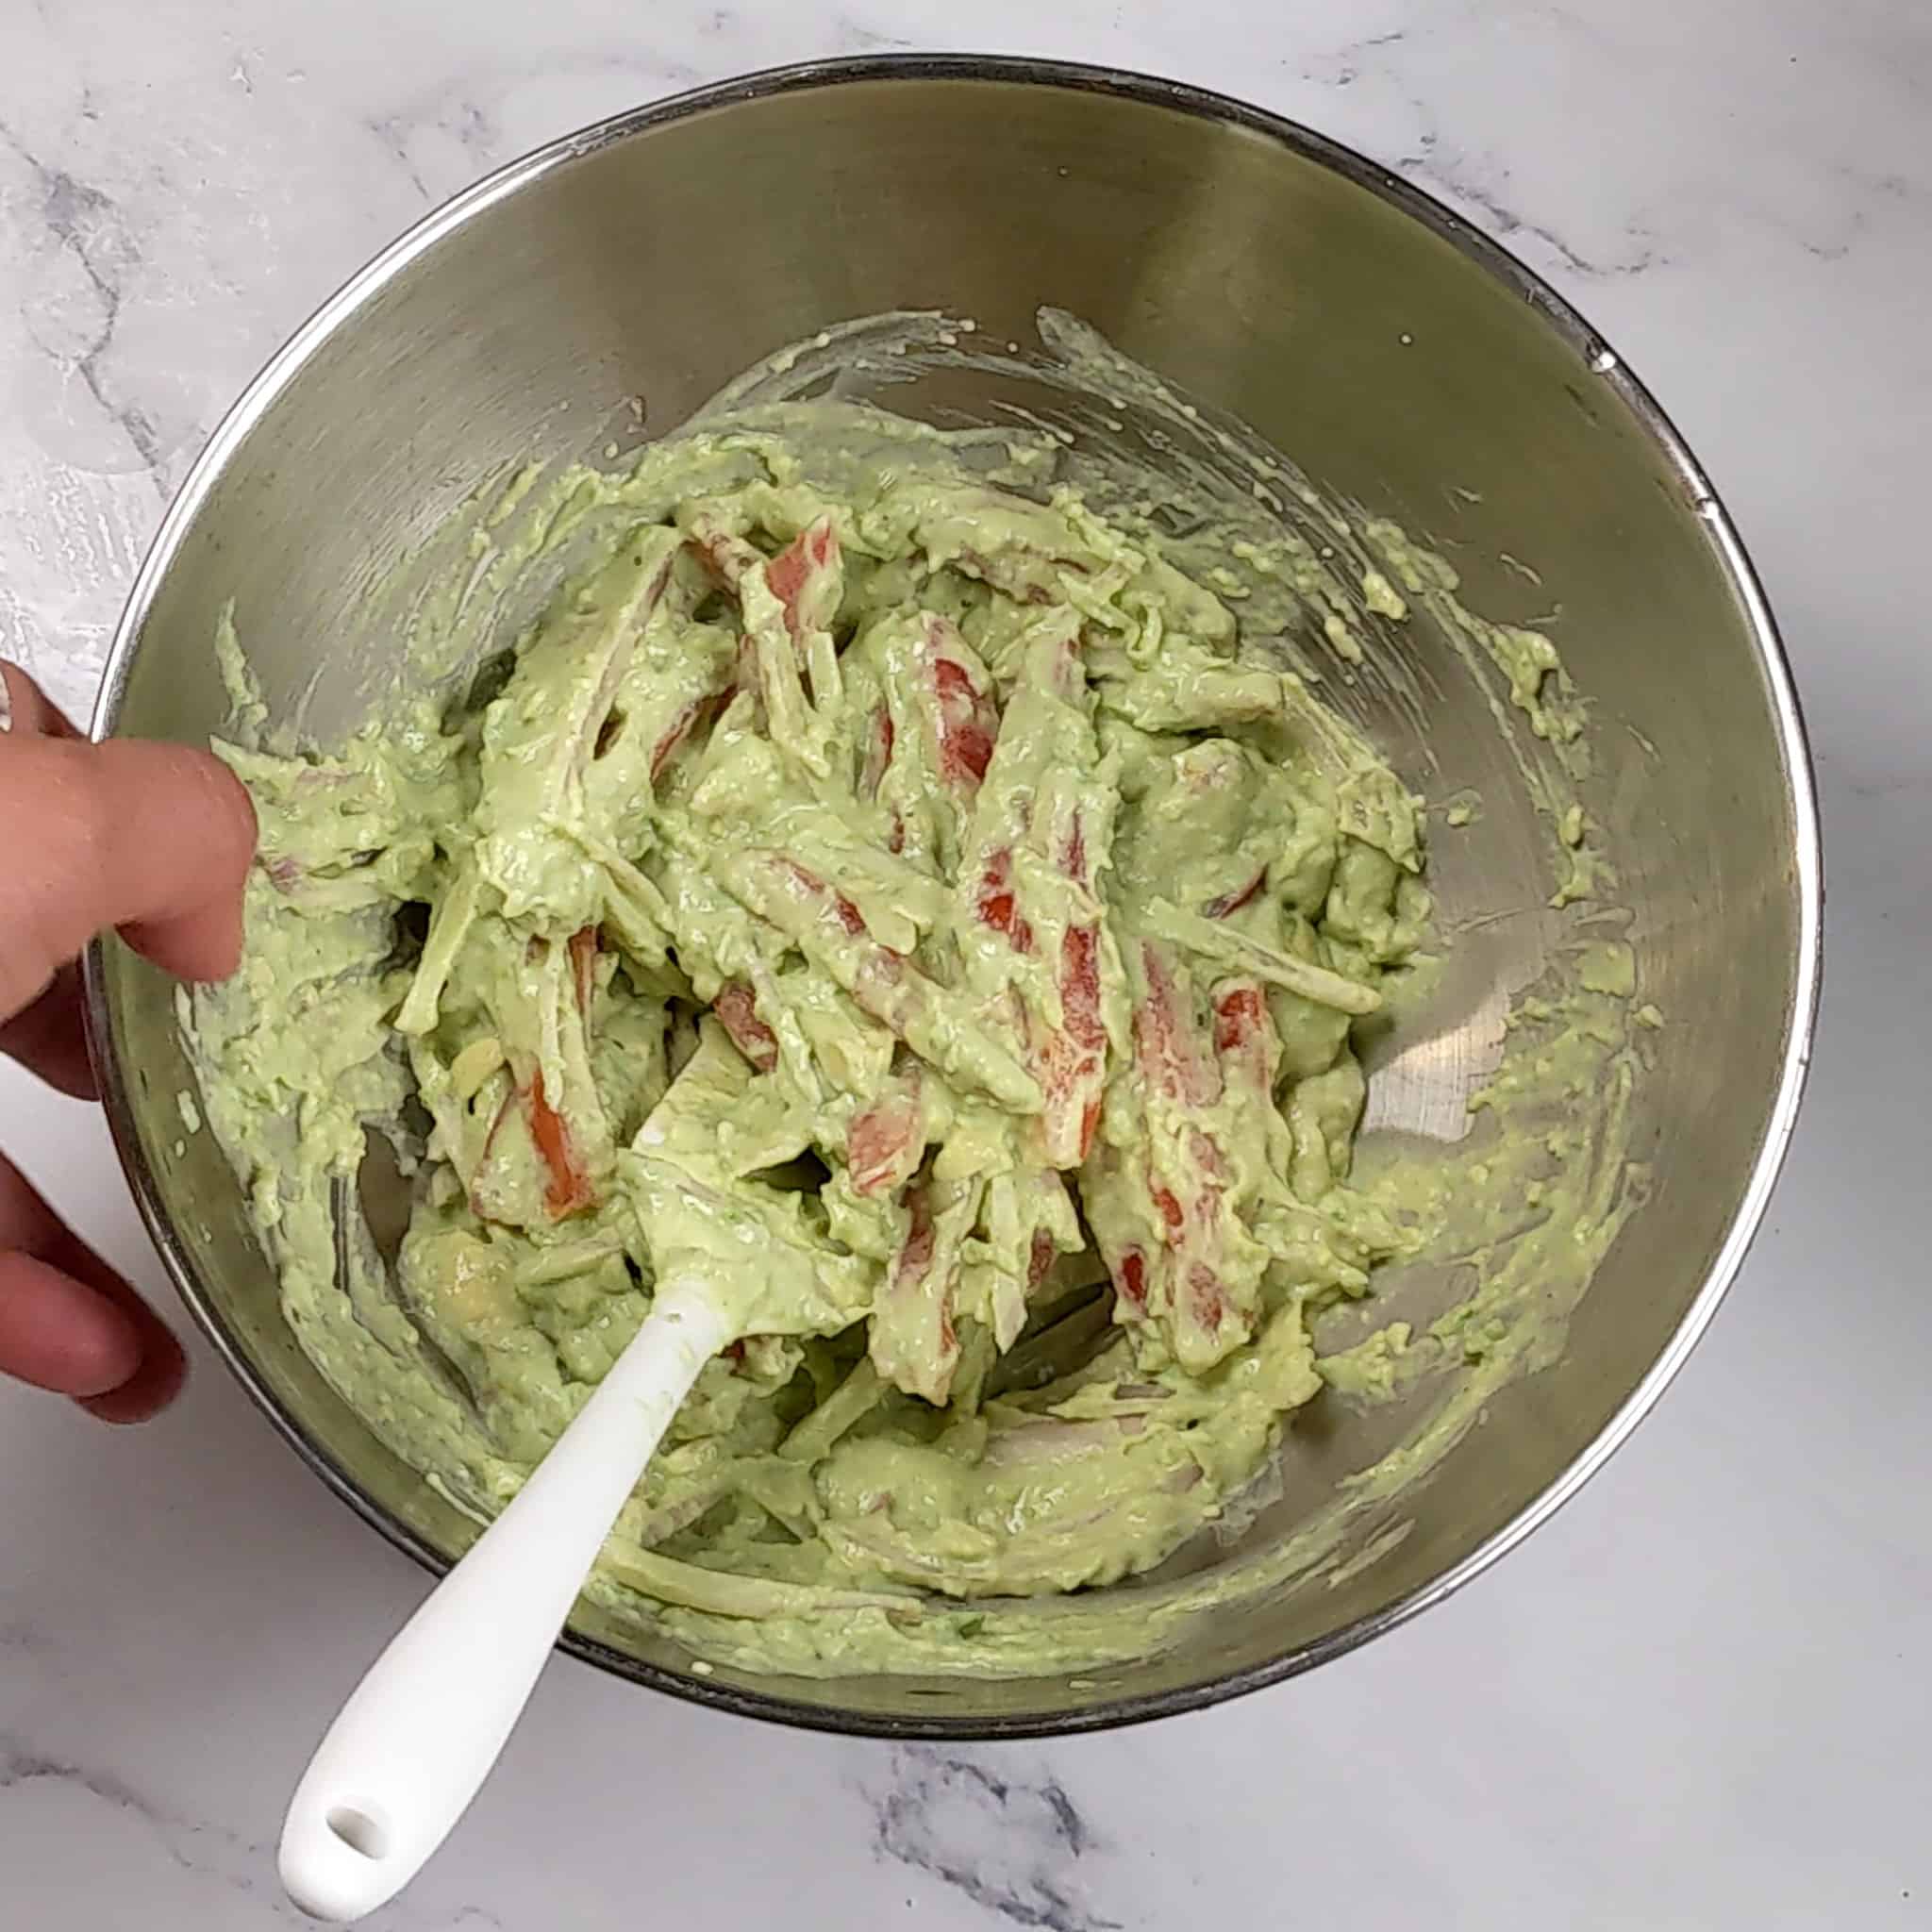 avocado cream mixed with thinly sliced shallots and plum tomatoes in a stainless steel mixing bowl with a silicon spatula resting inside.